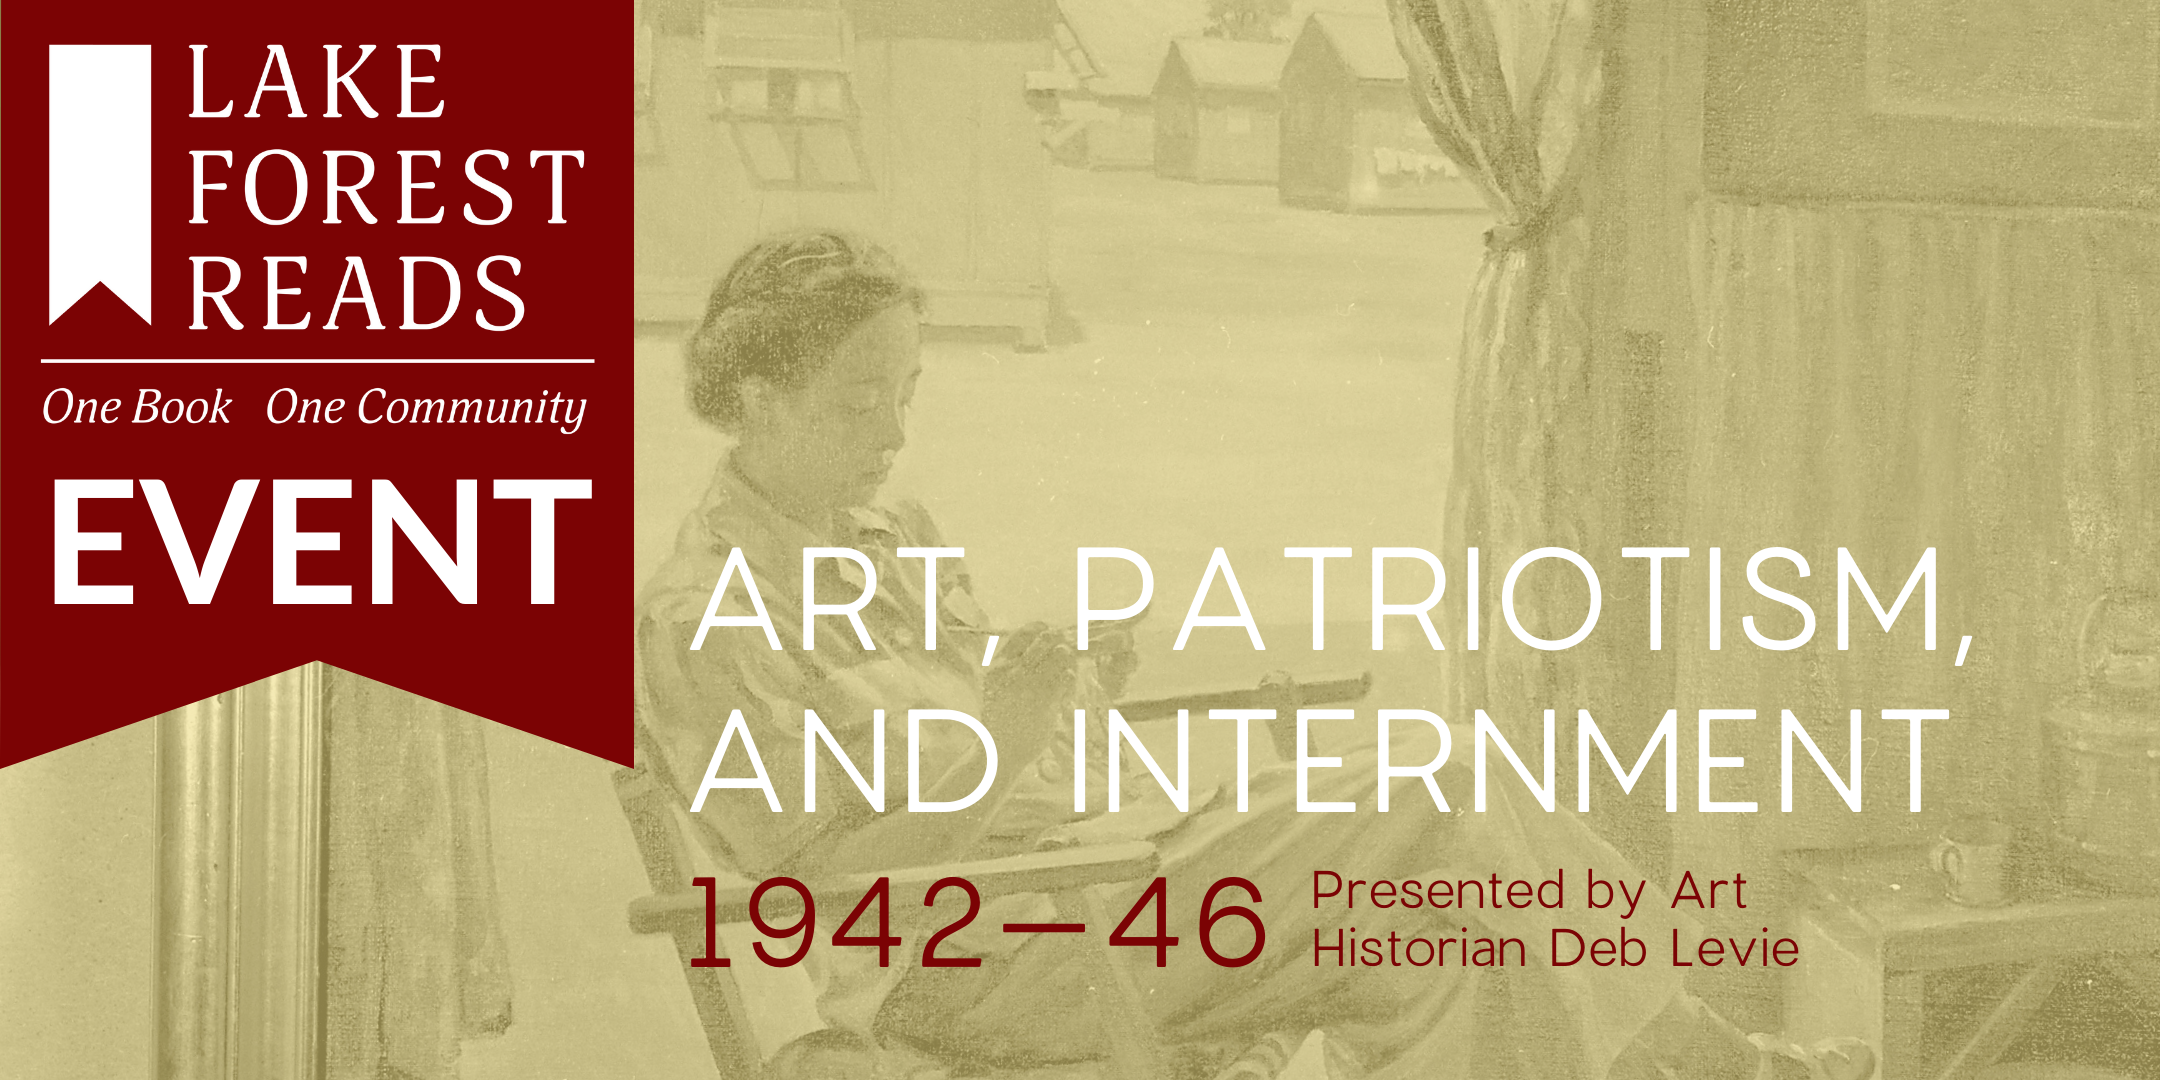 Lake Forest Reads: Art, Patriotism, and Internment 1942-46 image